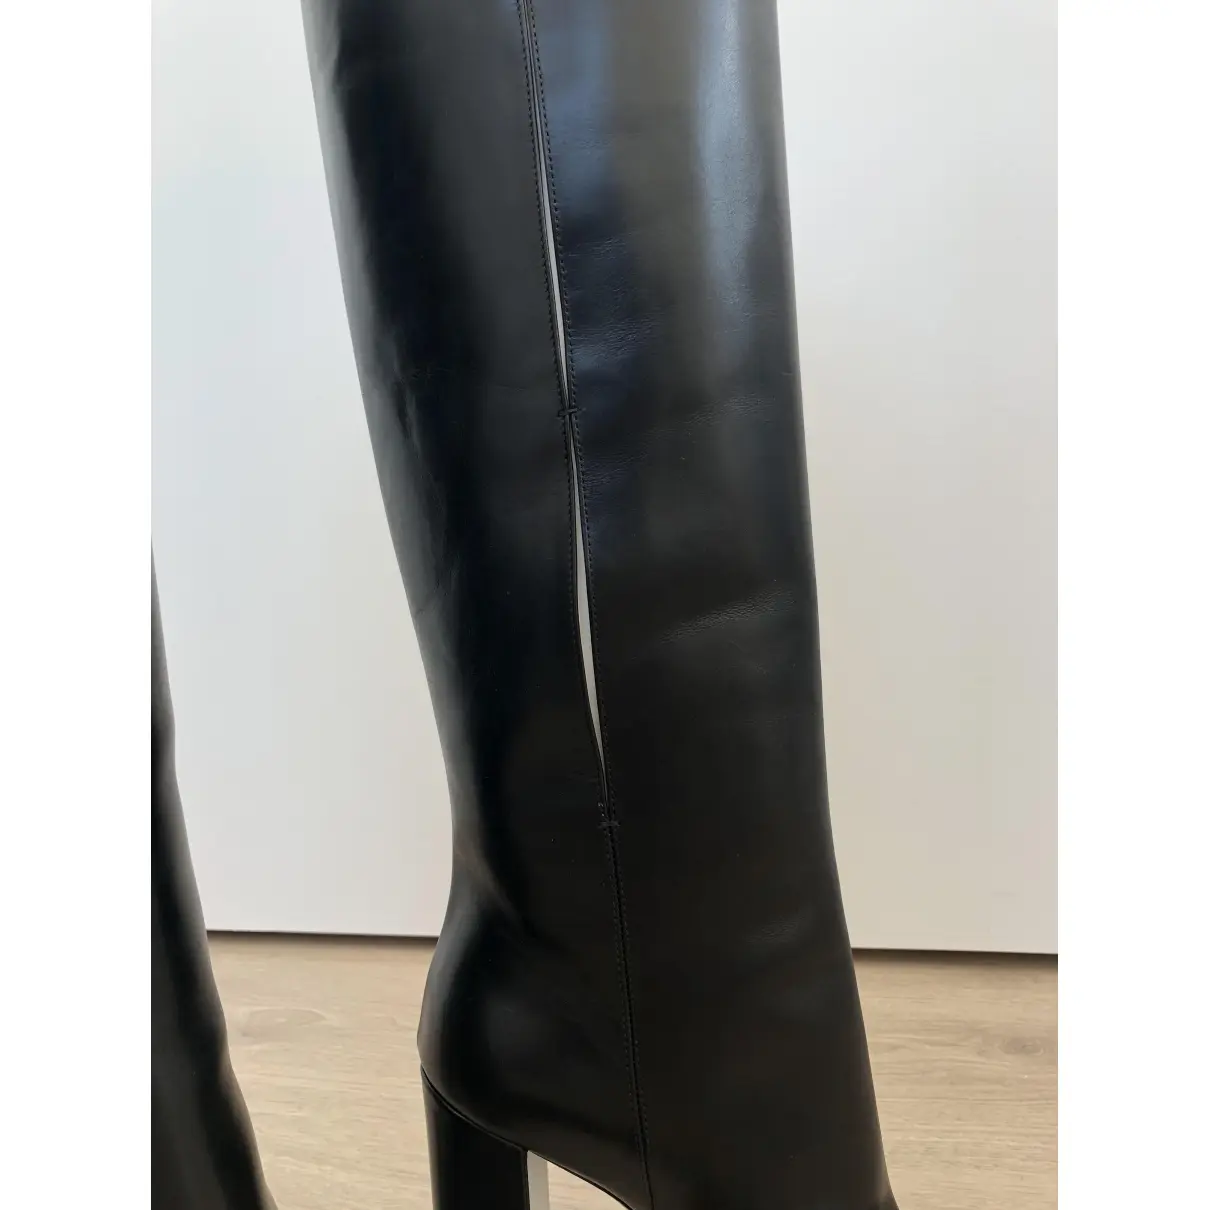 Buy Louis Vuitton Matchmake leather boots online